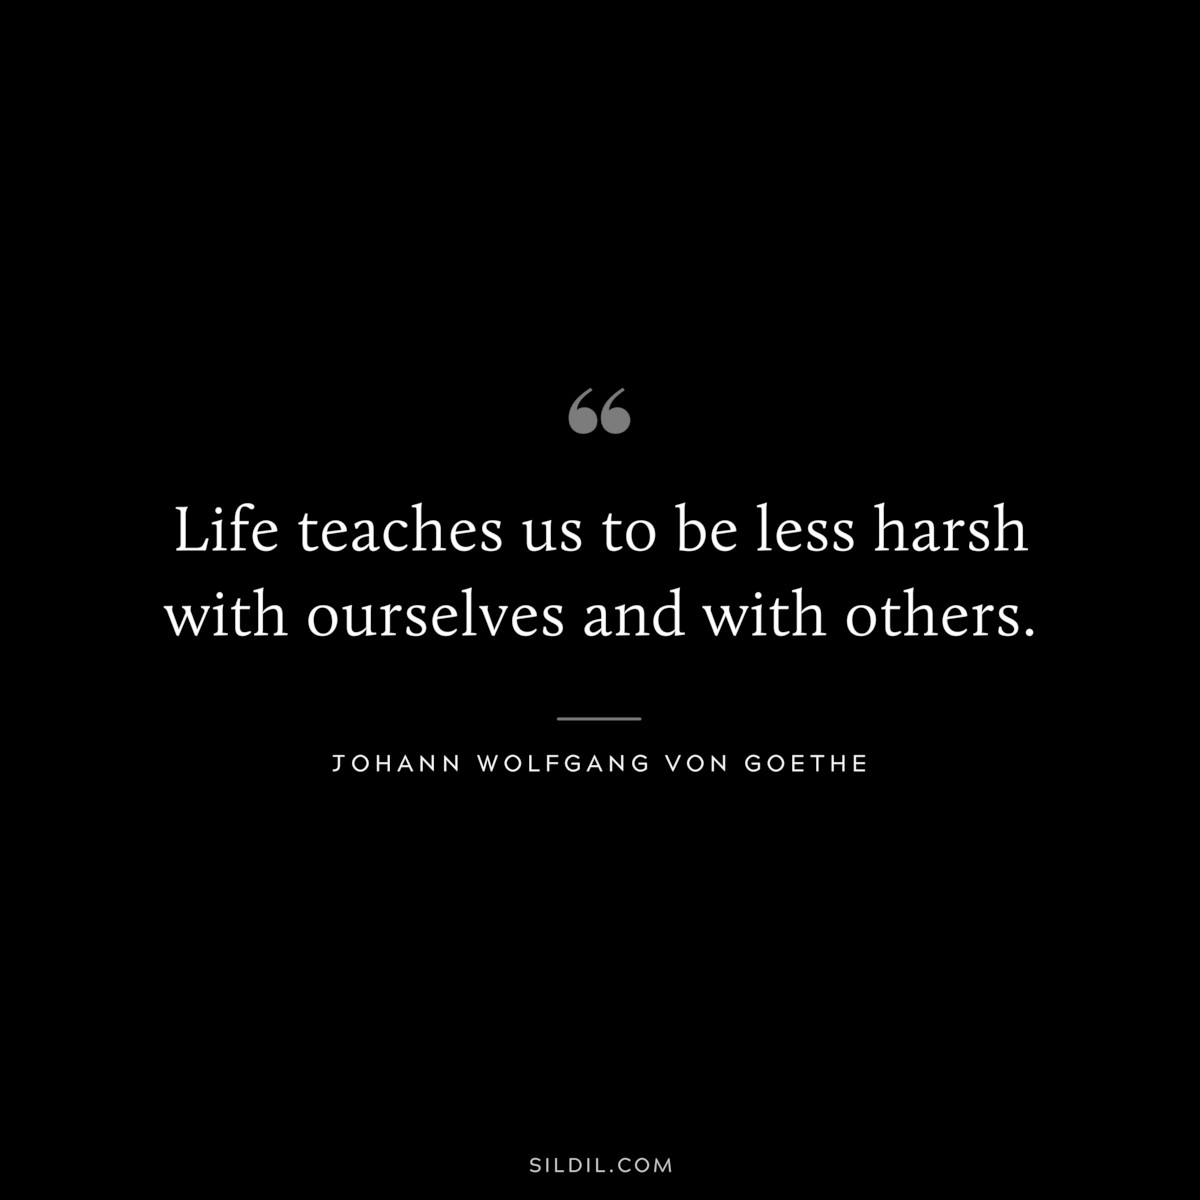 Life teaches us to be less harsh with ourselves and with others.― Johann Wolfgang von Goethe